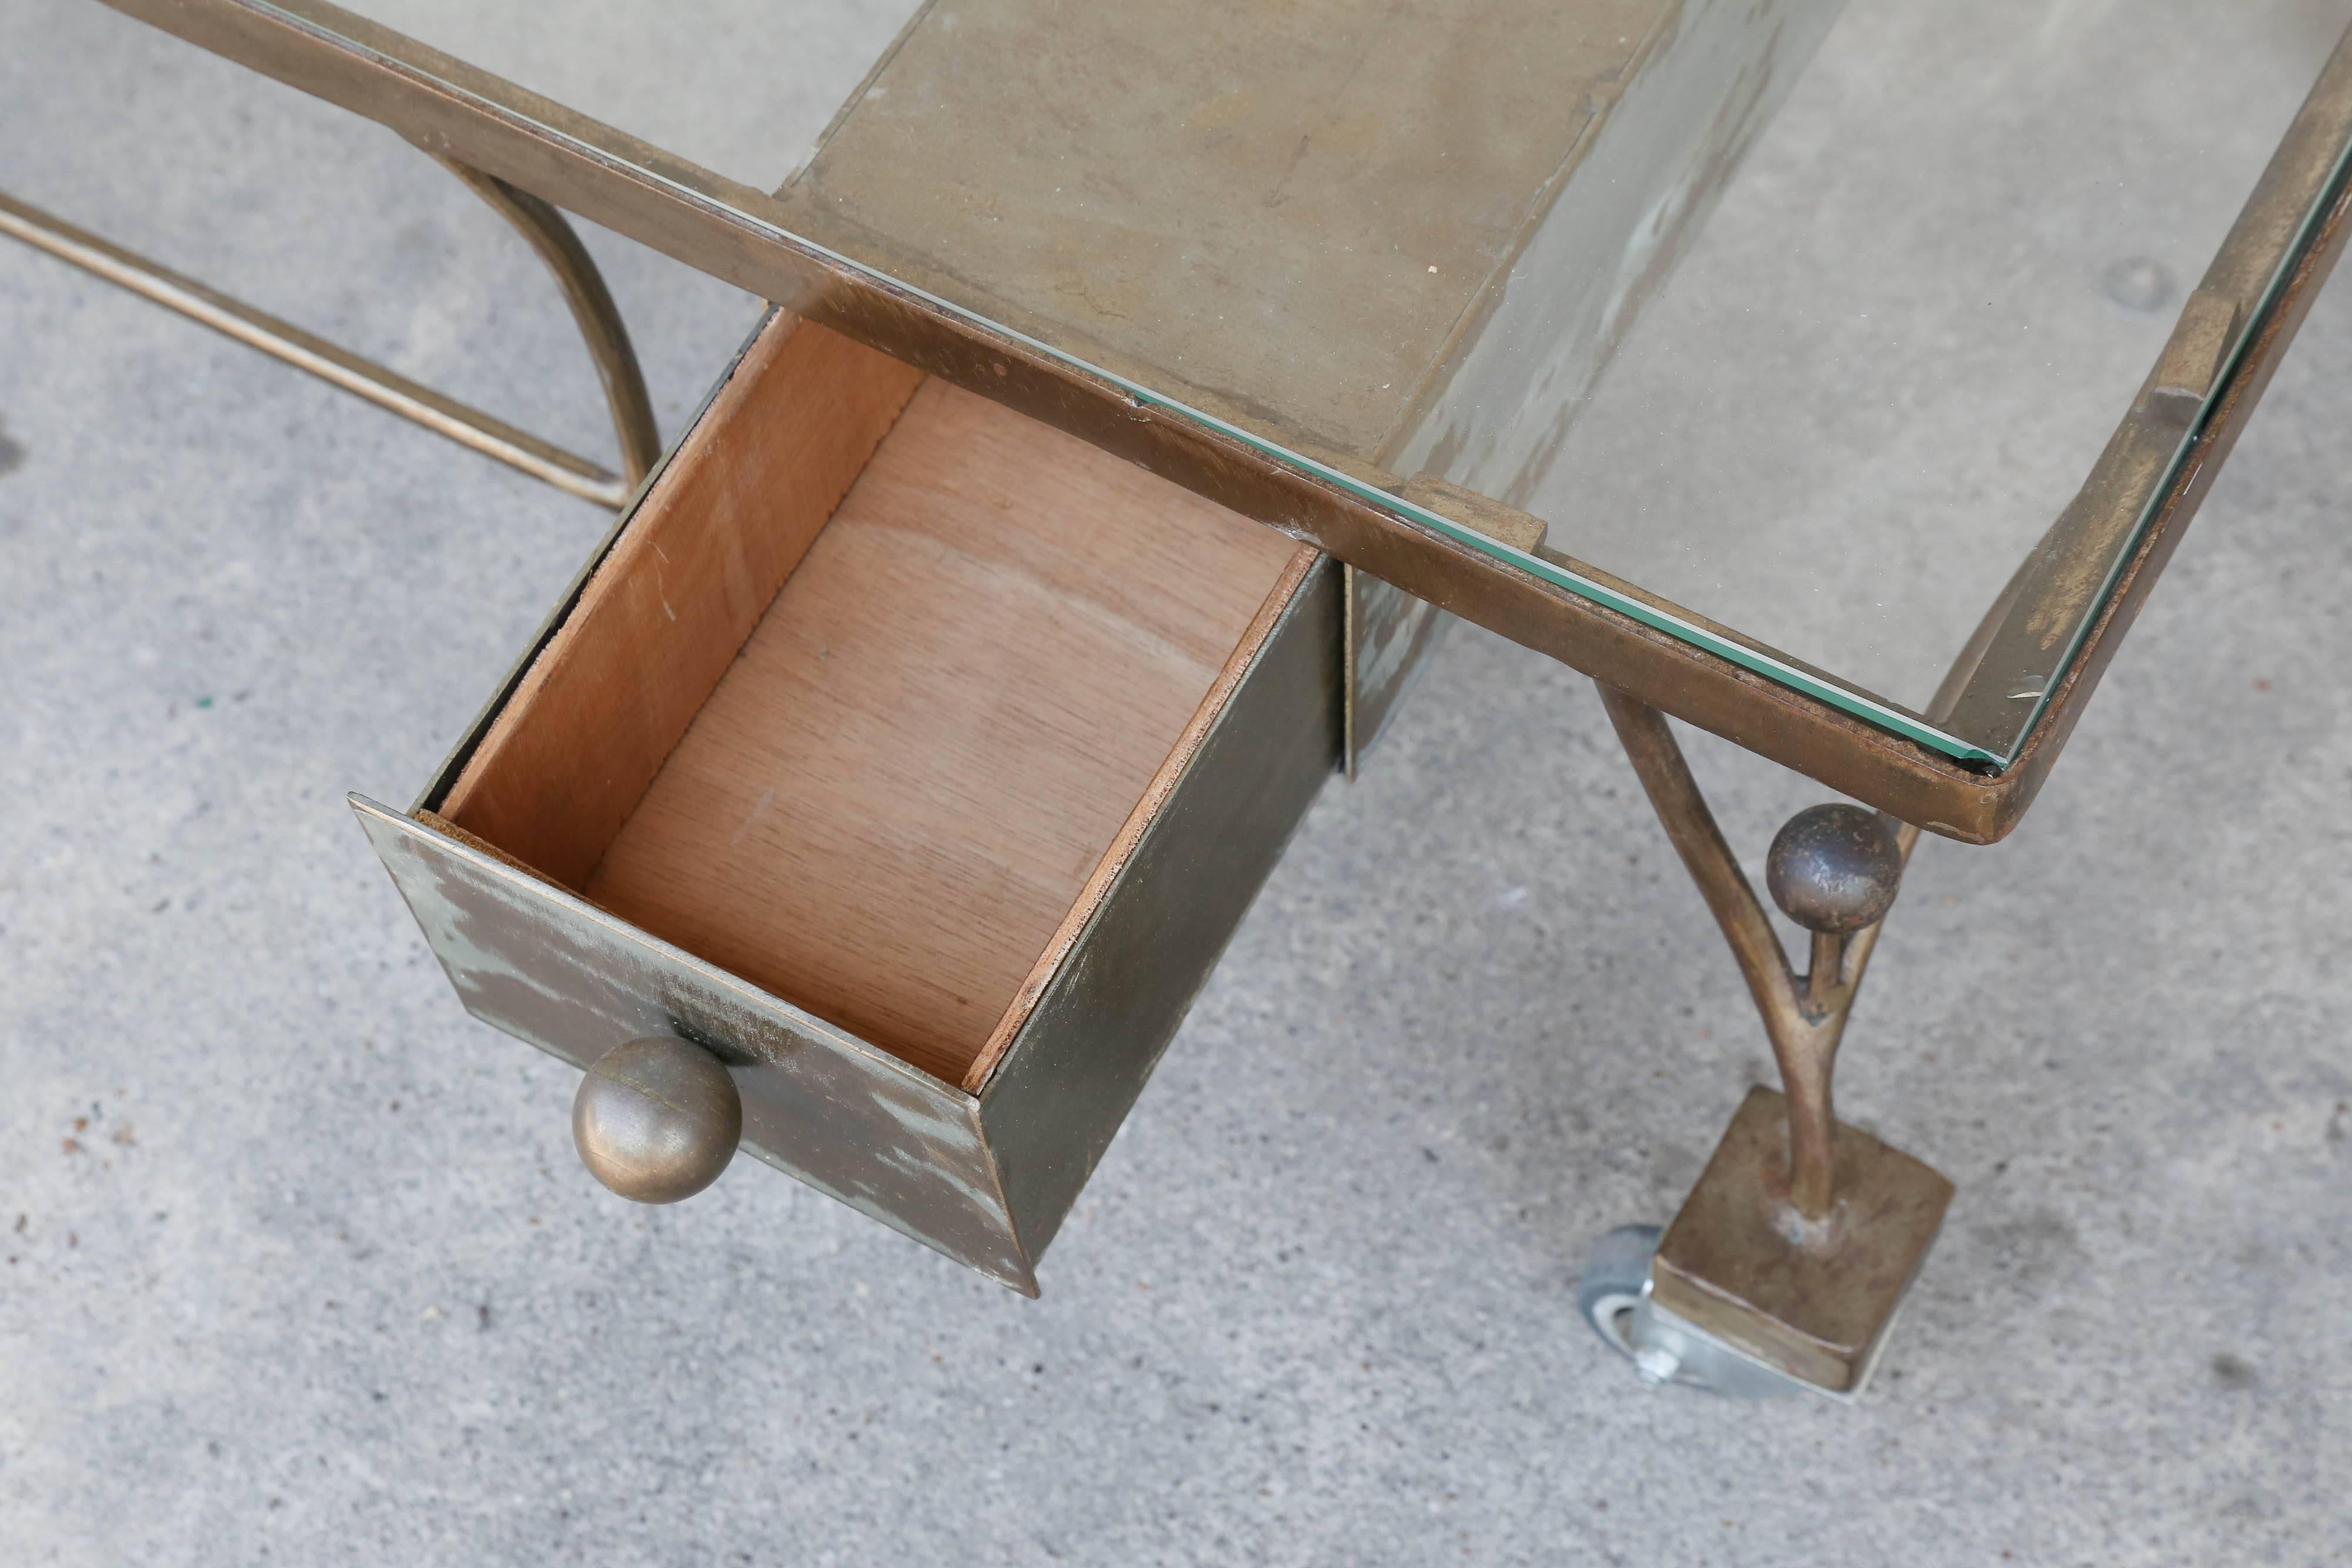 This is a darling midcentury French metal and glass cocktail table on wheels. The design of this piece even includes a narrow drawer at one side with a pull that echoes the decorative spherical accents on each leg. The finish of the metal is a